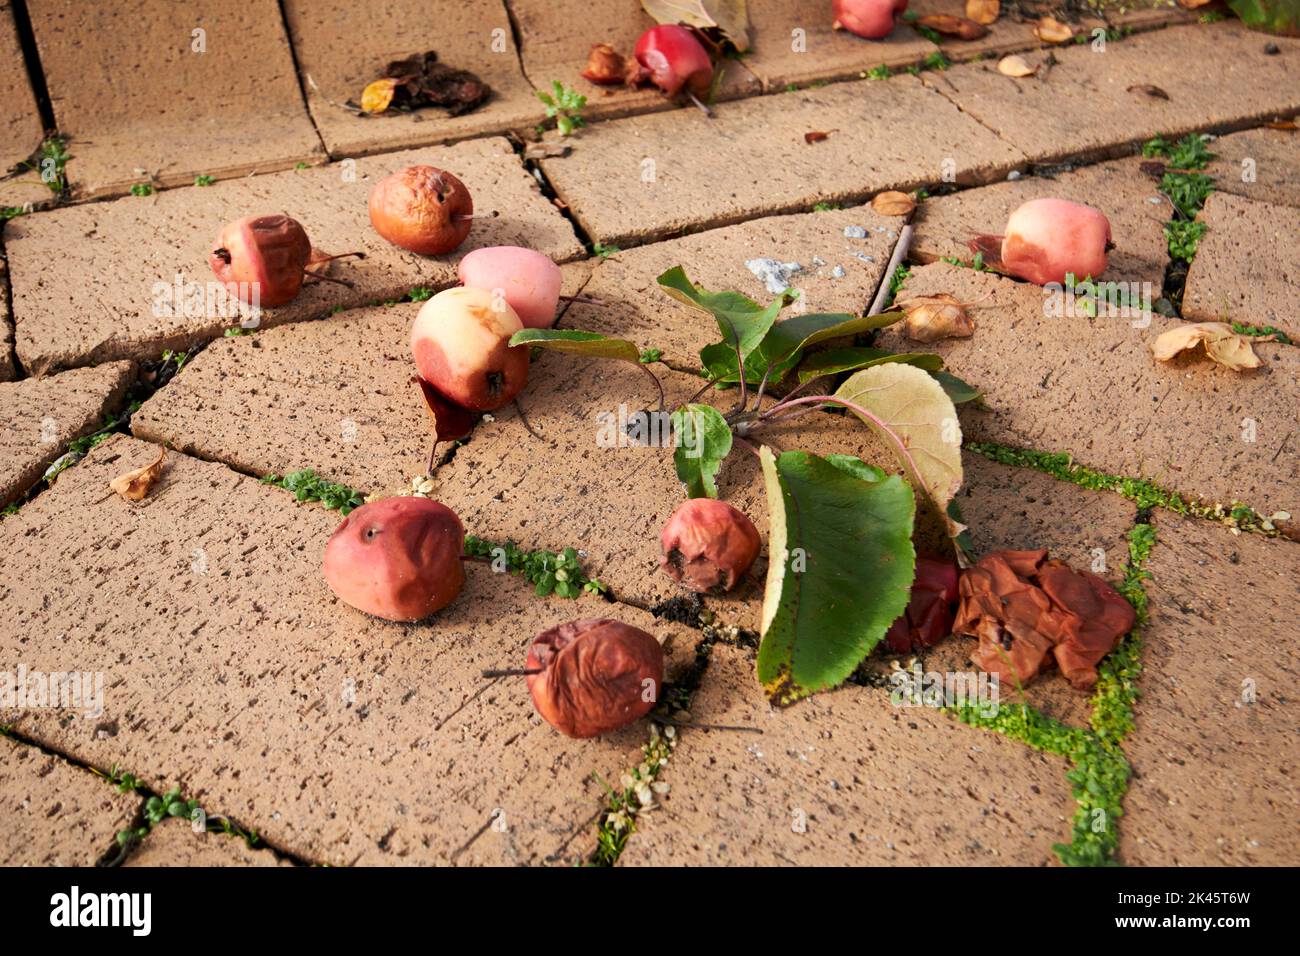 windfallen and rotting crab apples on a pavement in the uk Stock Photo